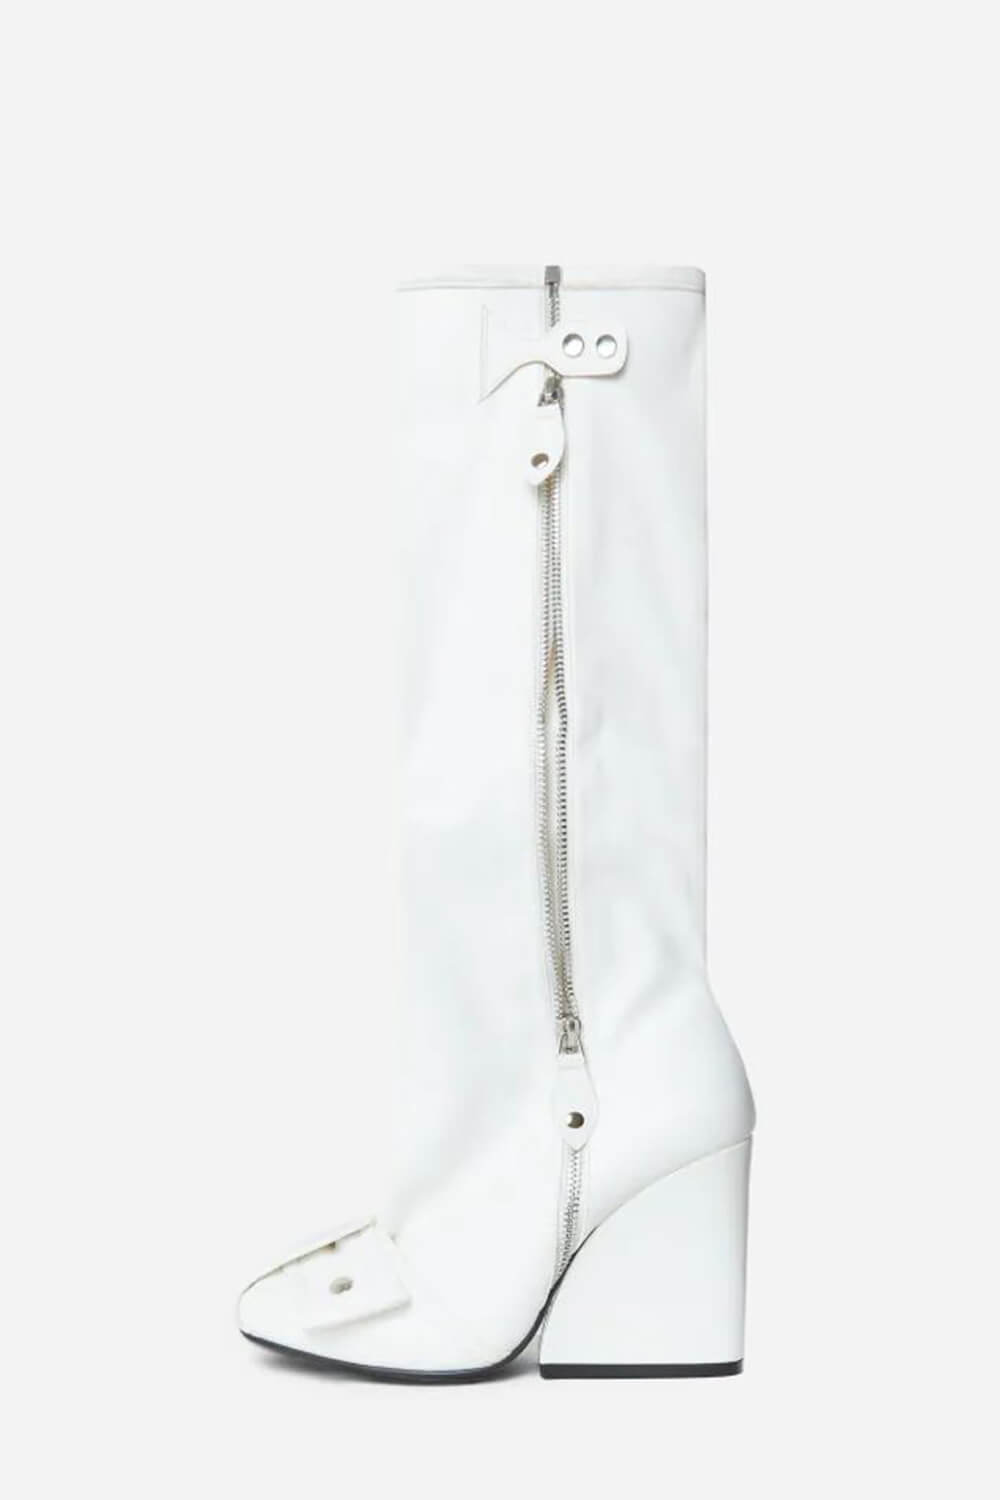 Buckle Detail Square Toe Blue Wedge Heel Knee High Long Boots - White